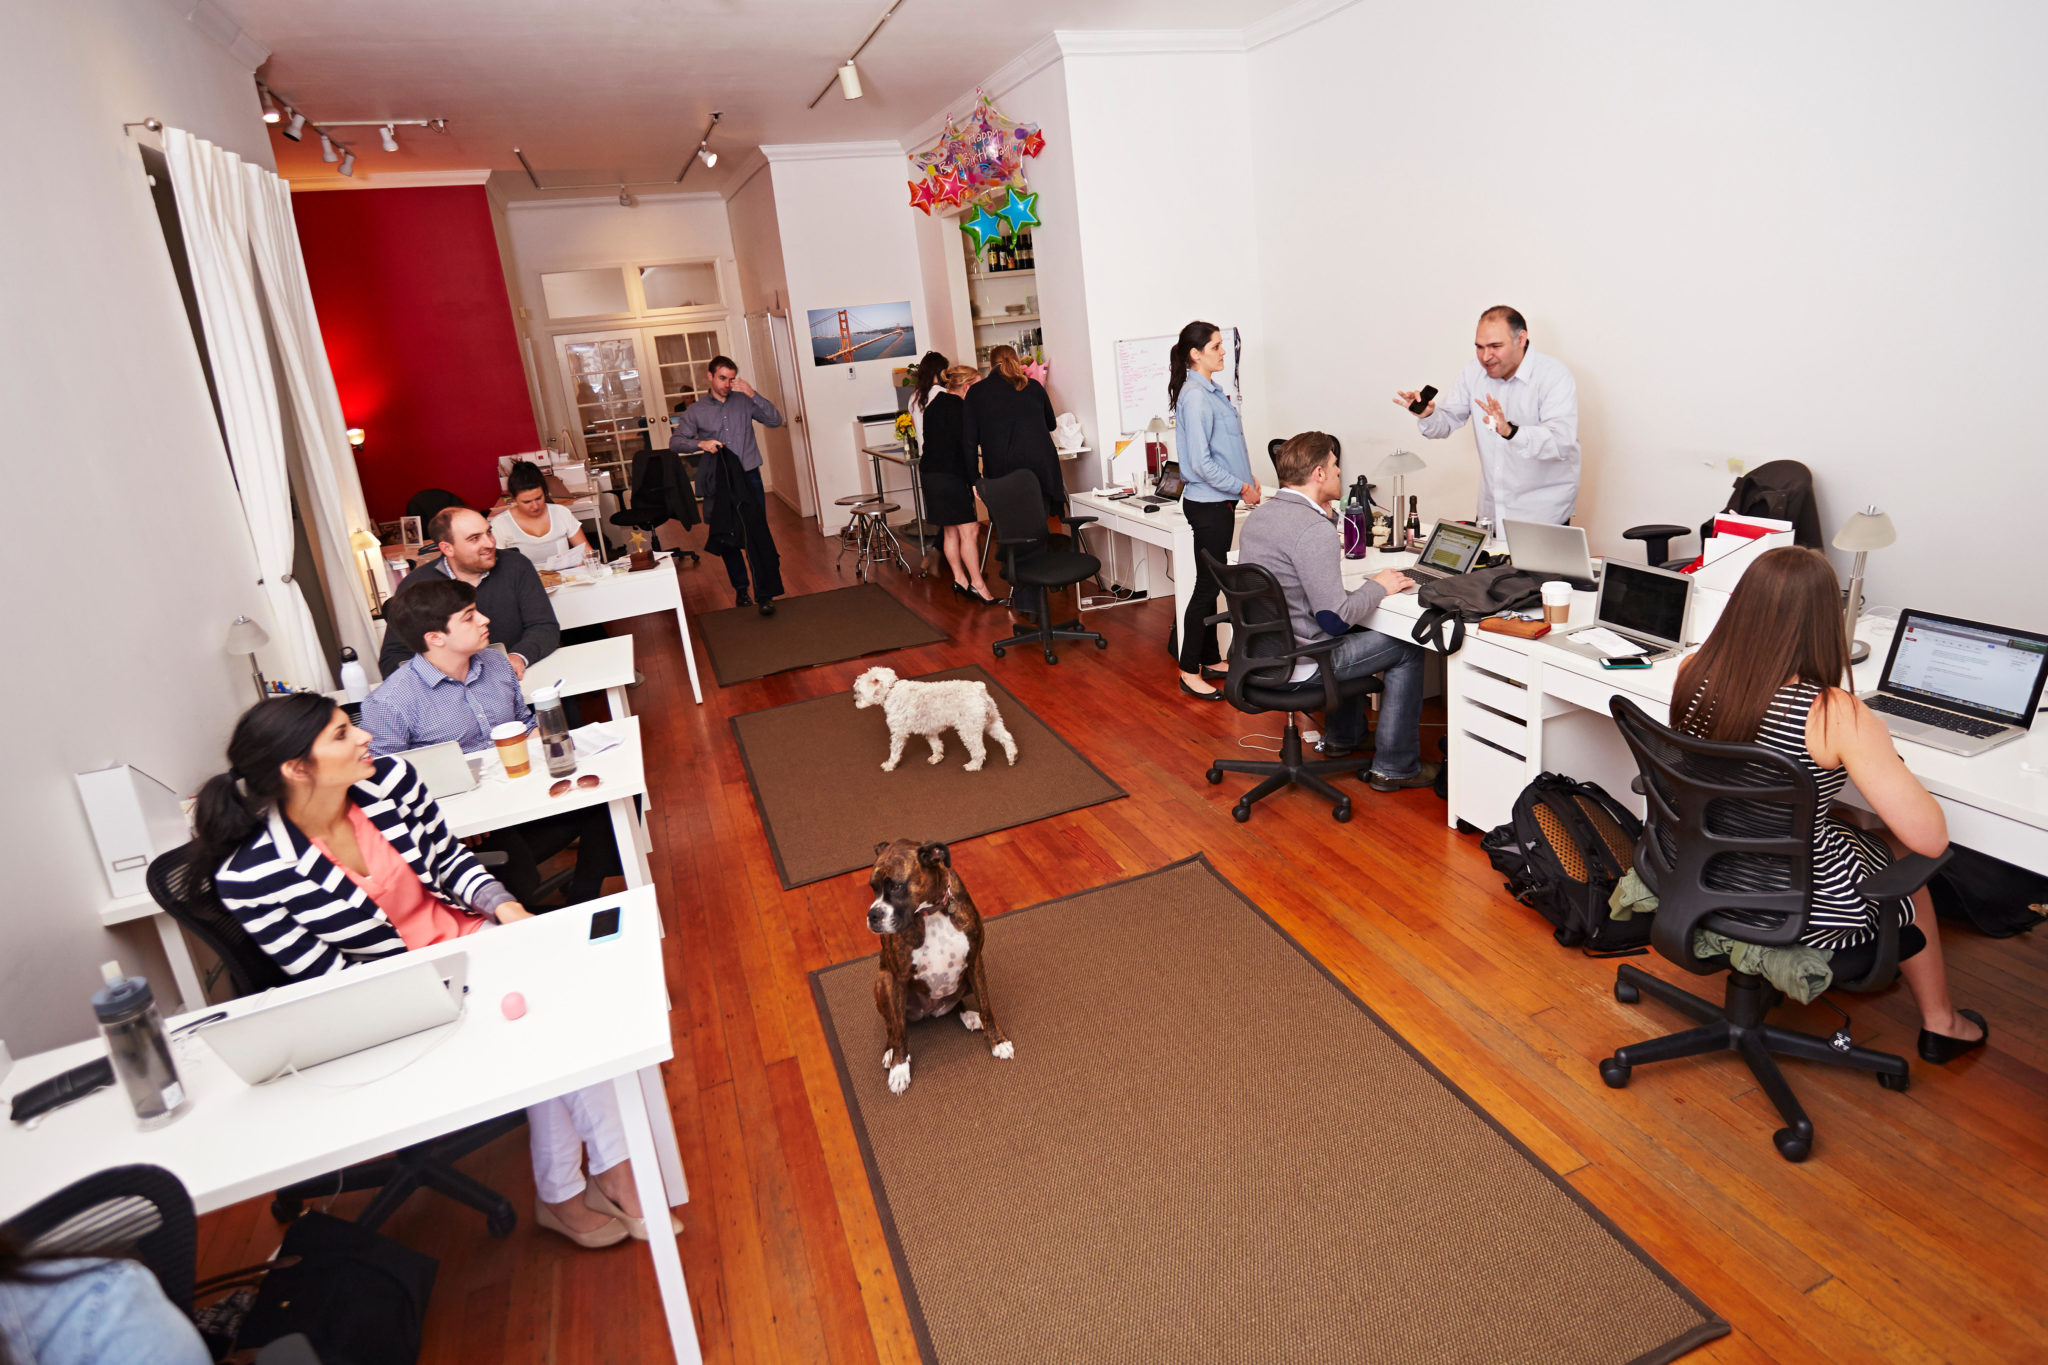 People at work in an office with dogs in April 2014